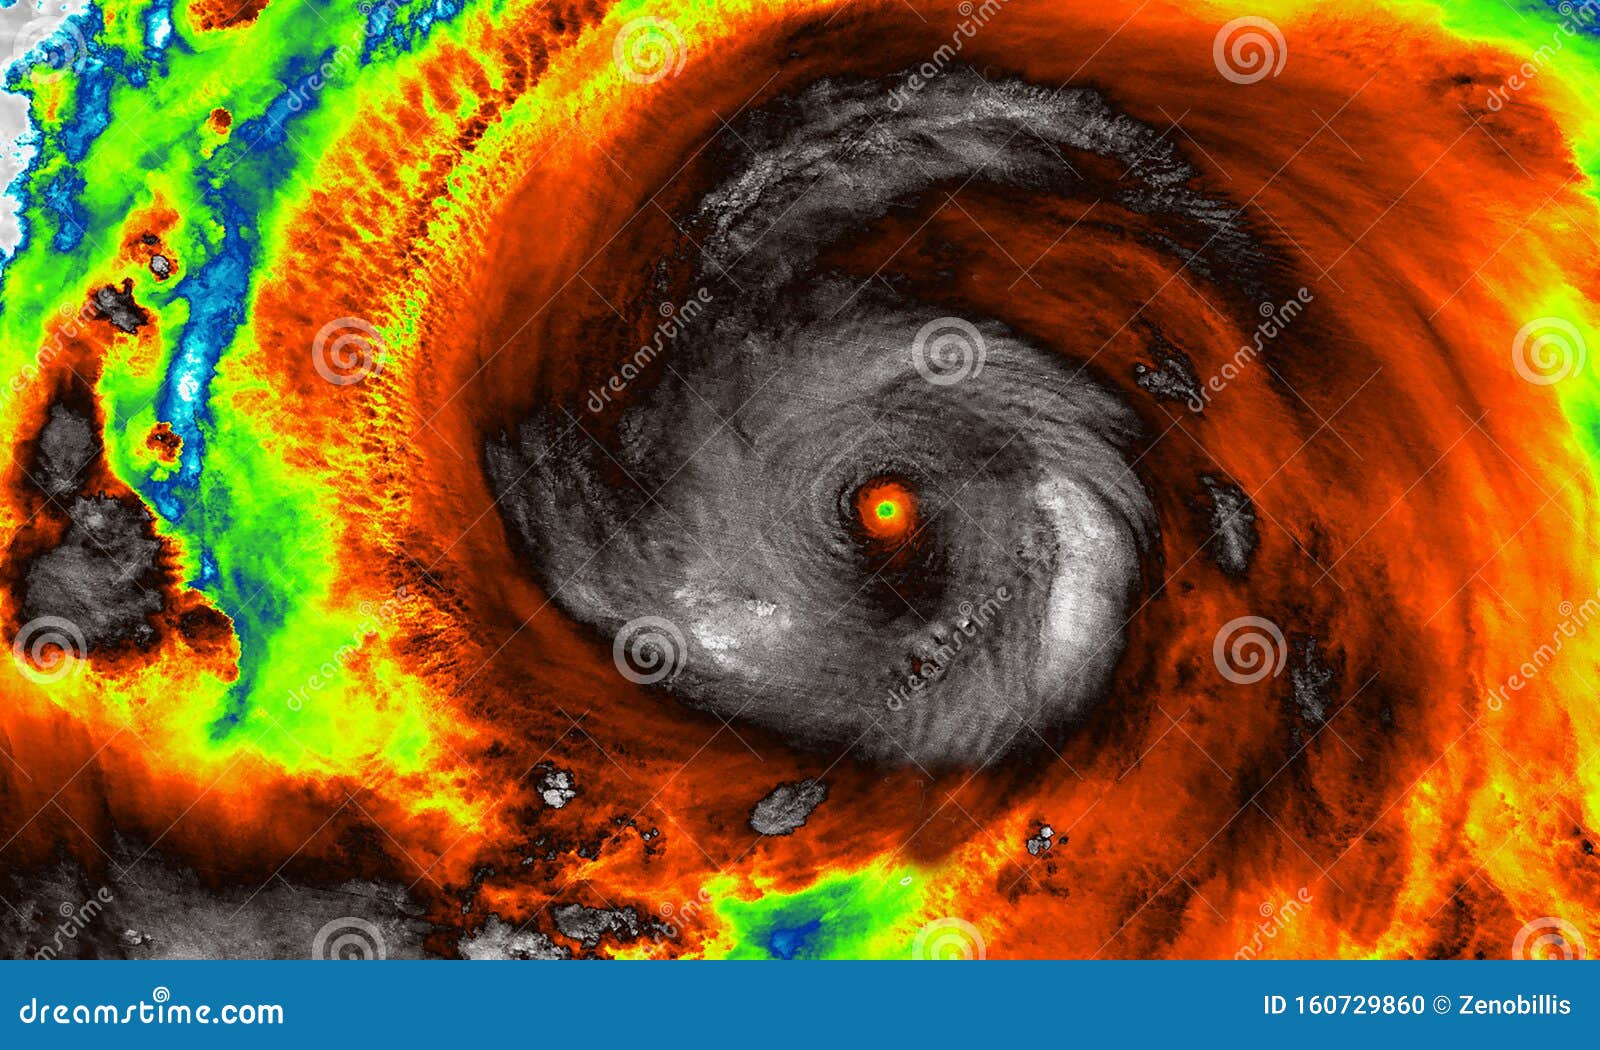 infrared imaging map of super typhoon. the eye of the hurricane. satellite view